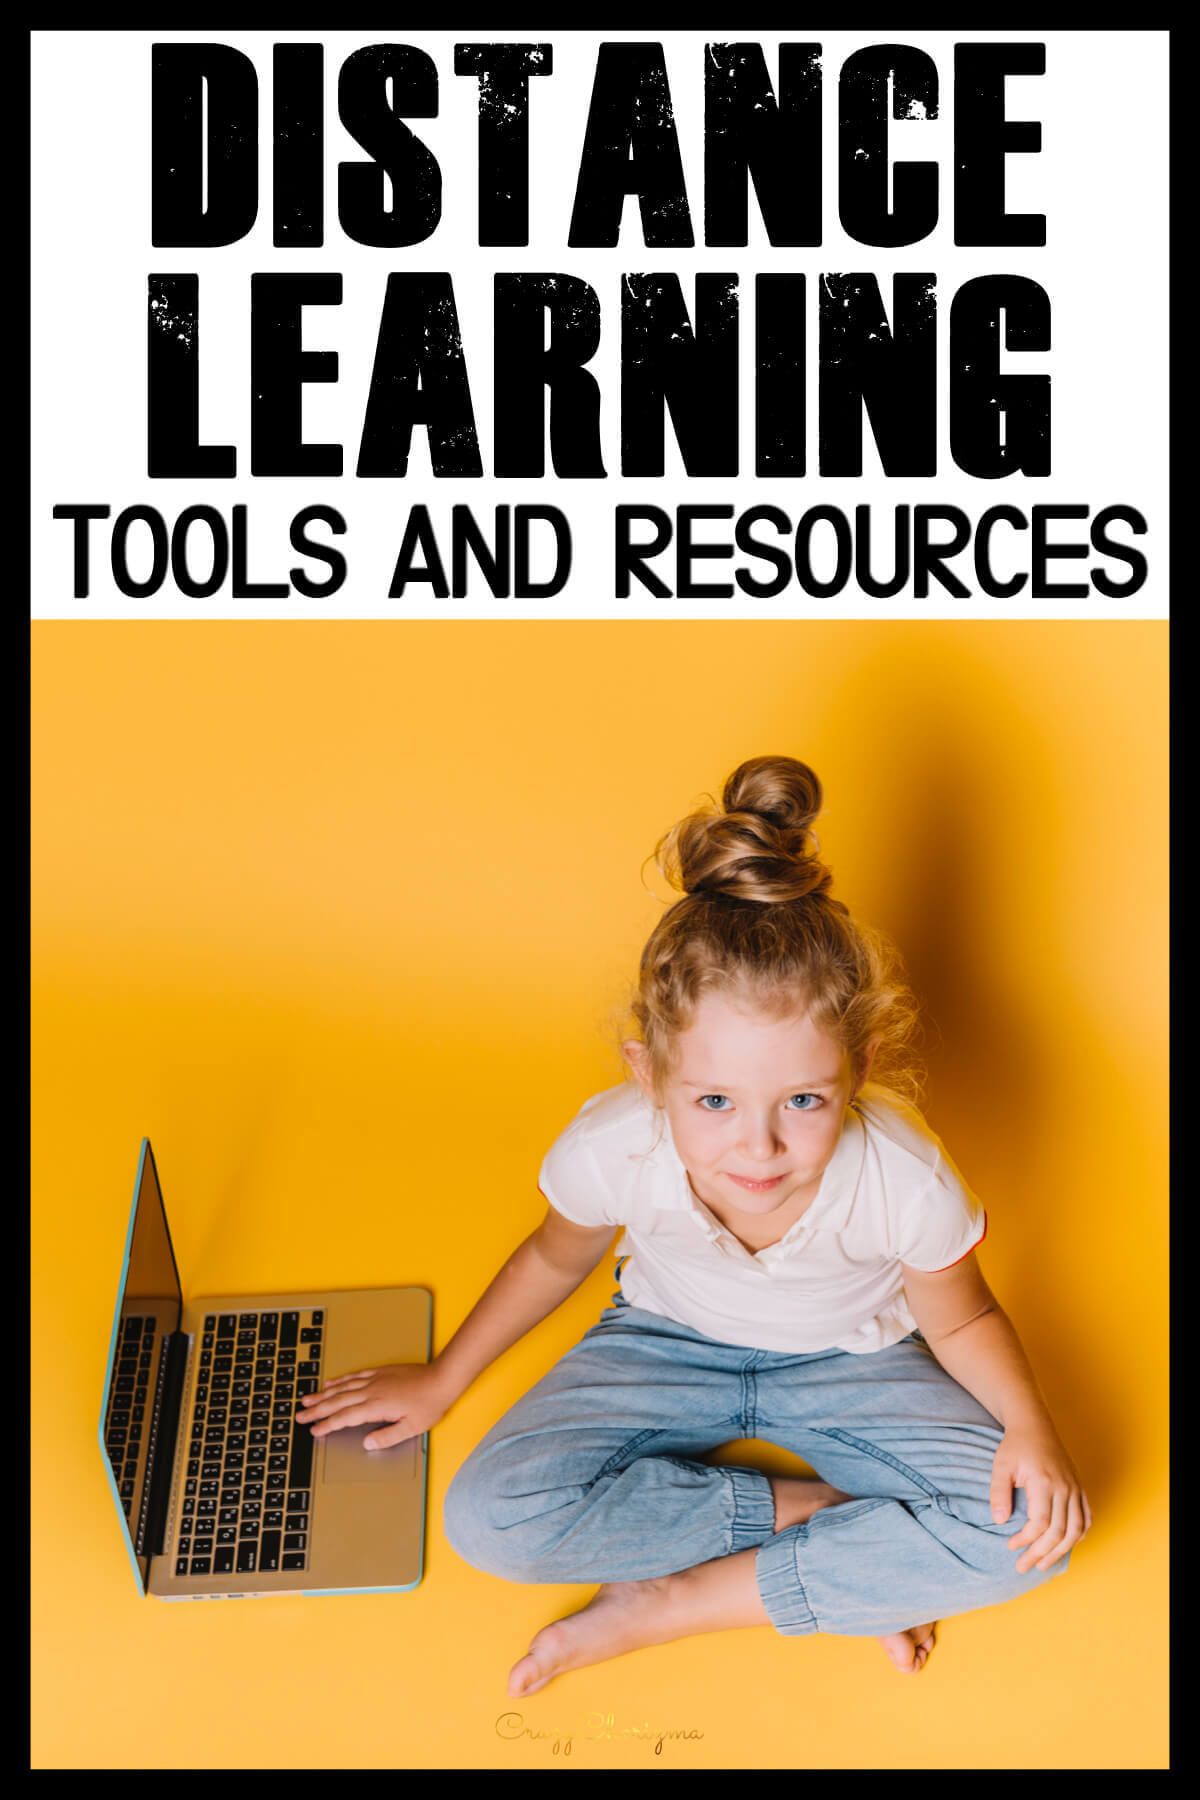 Even if your school is closed, don't panic. You can only control the controllable. Meaning, YOU can keep your students learning and engaged. Here are some tools and teaching resources to help you in remote learning.